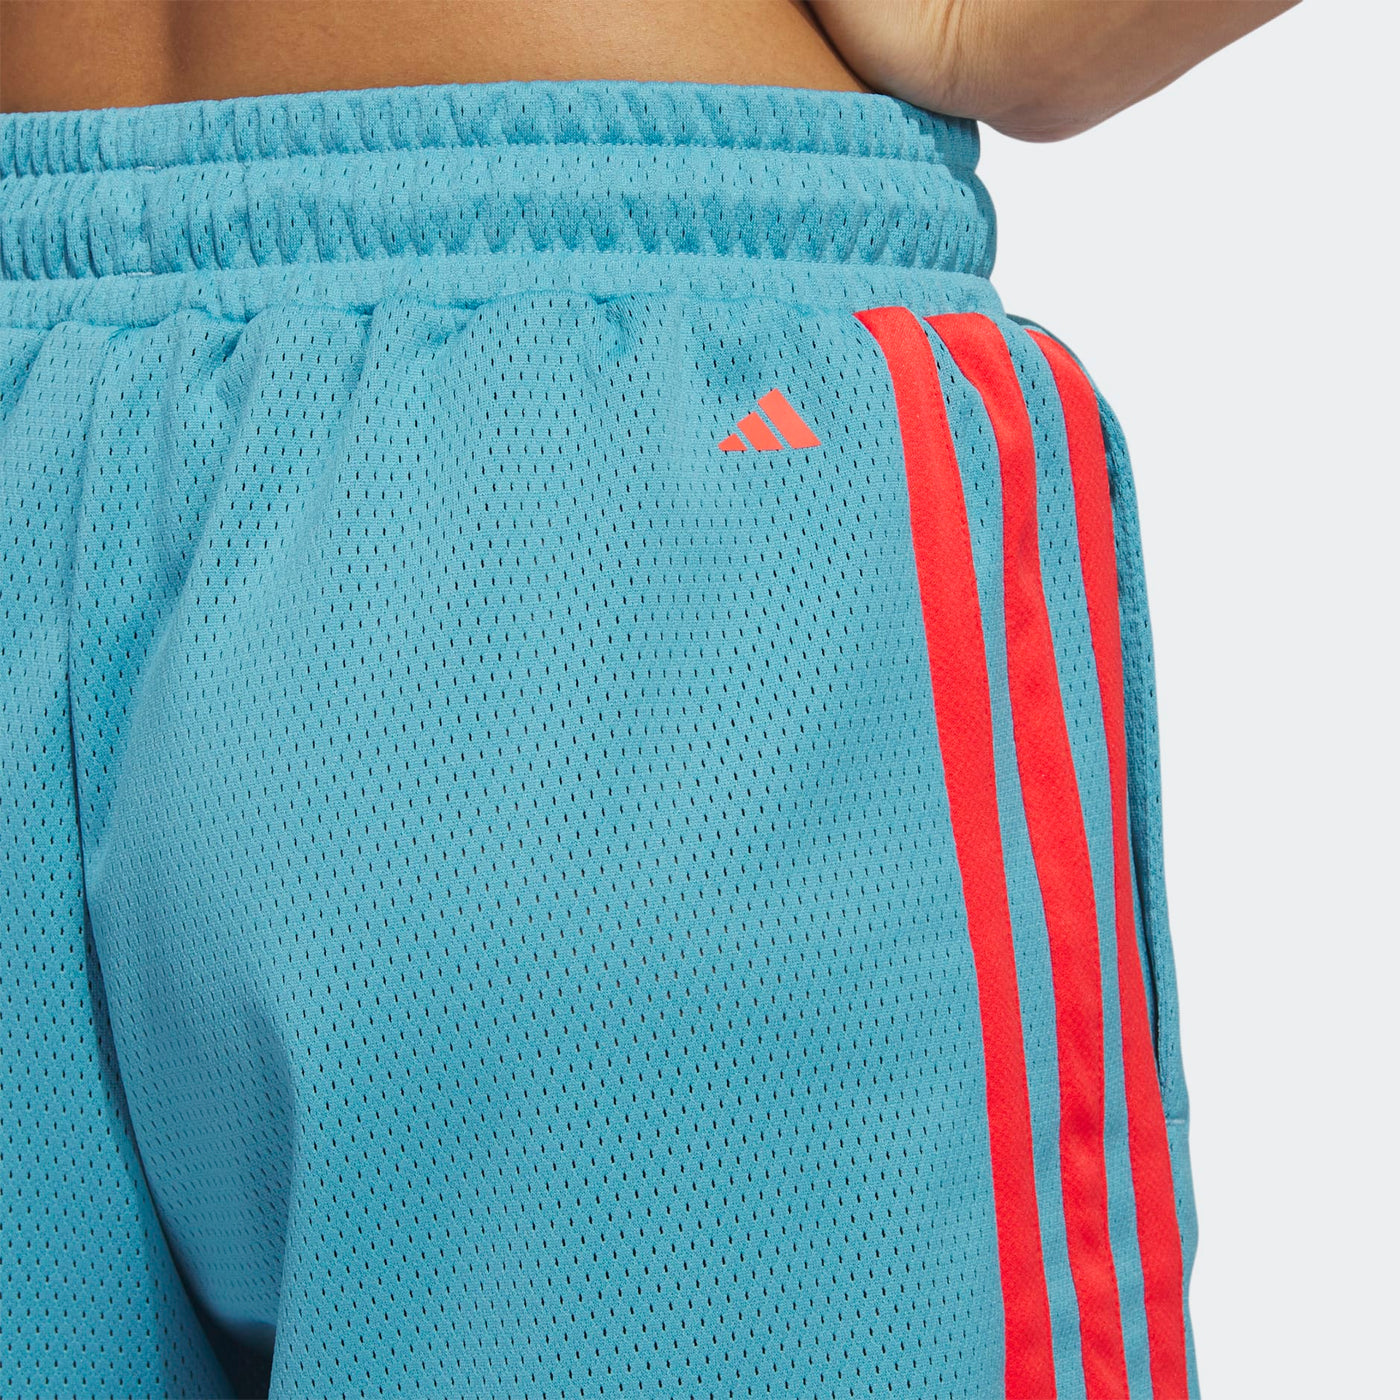 Adidas Select 3 Stripes Basketball Shorts - Preloved Blue/Bright Red